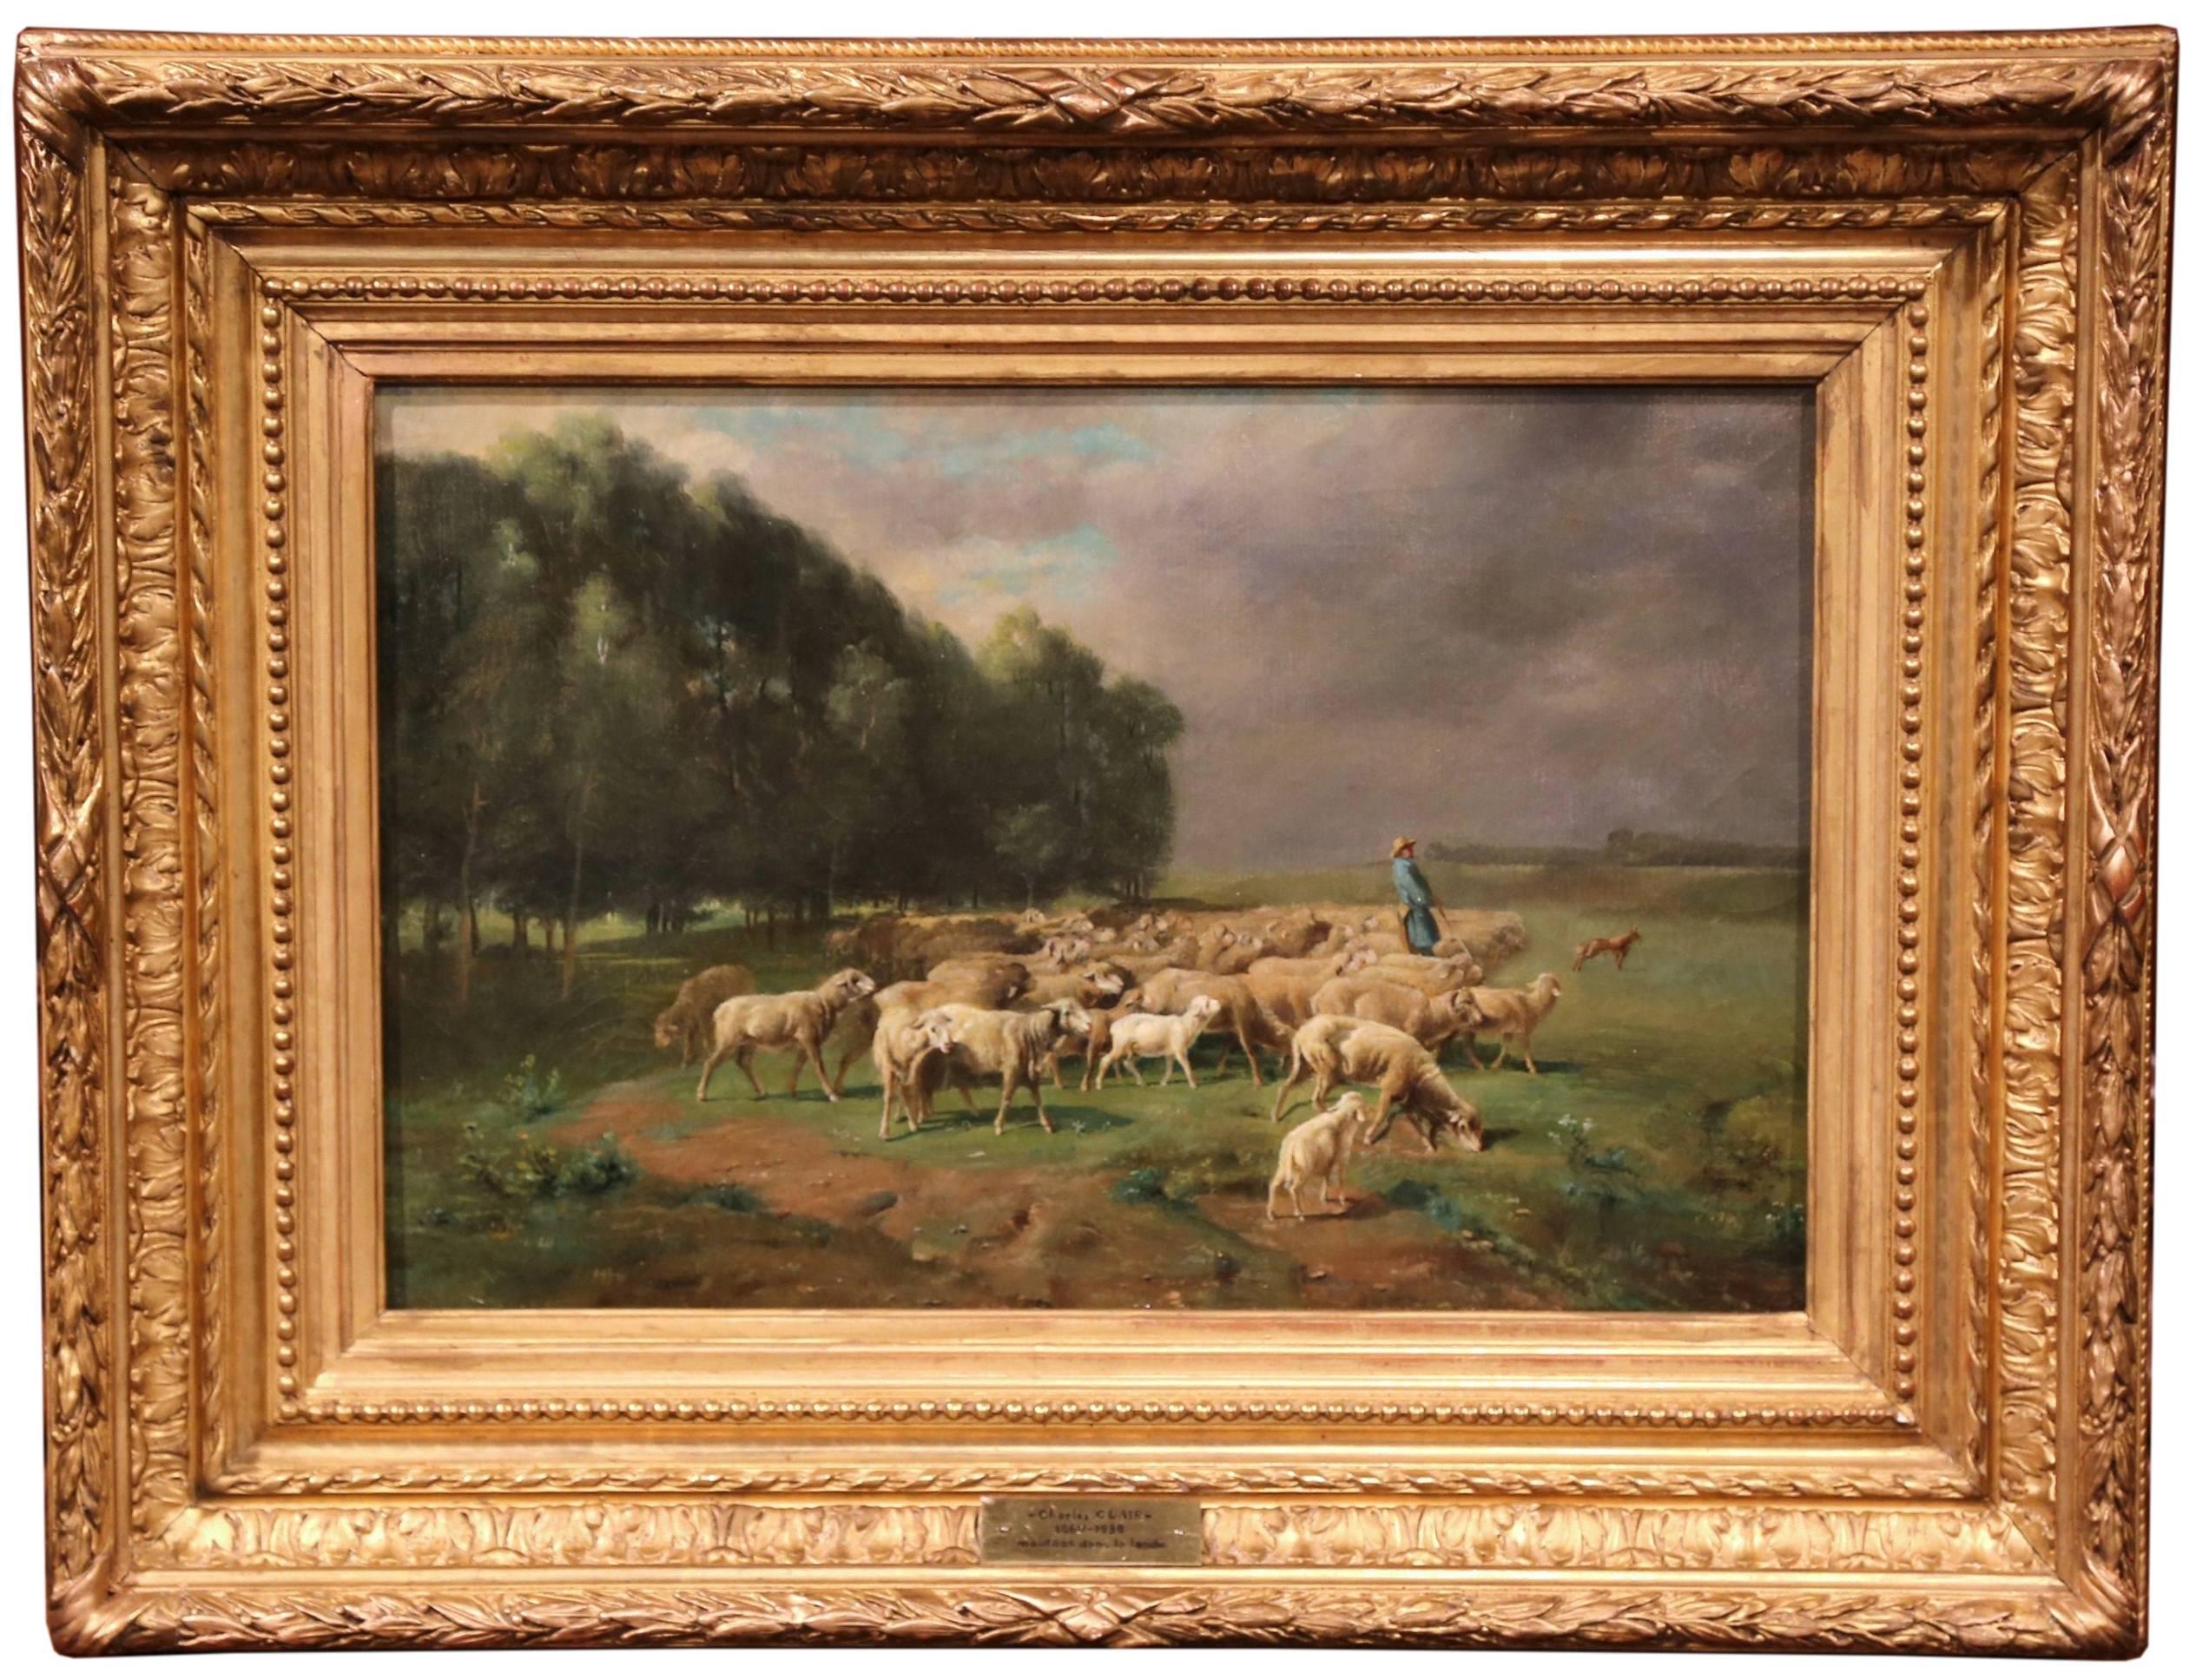 This beautiful, antique oil on canvas was painted in France circa 1900. The bucolic artwork features a herd of sheep grazing in the moor while a shepherd is looking over his flock. The piece has a front plaque which reads Charles Clair (1860-1930)